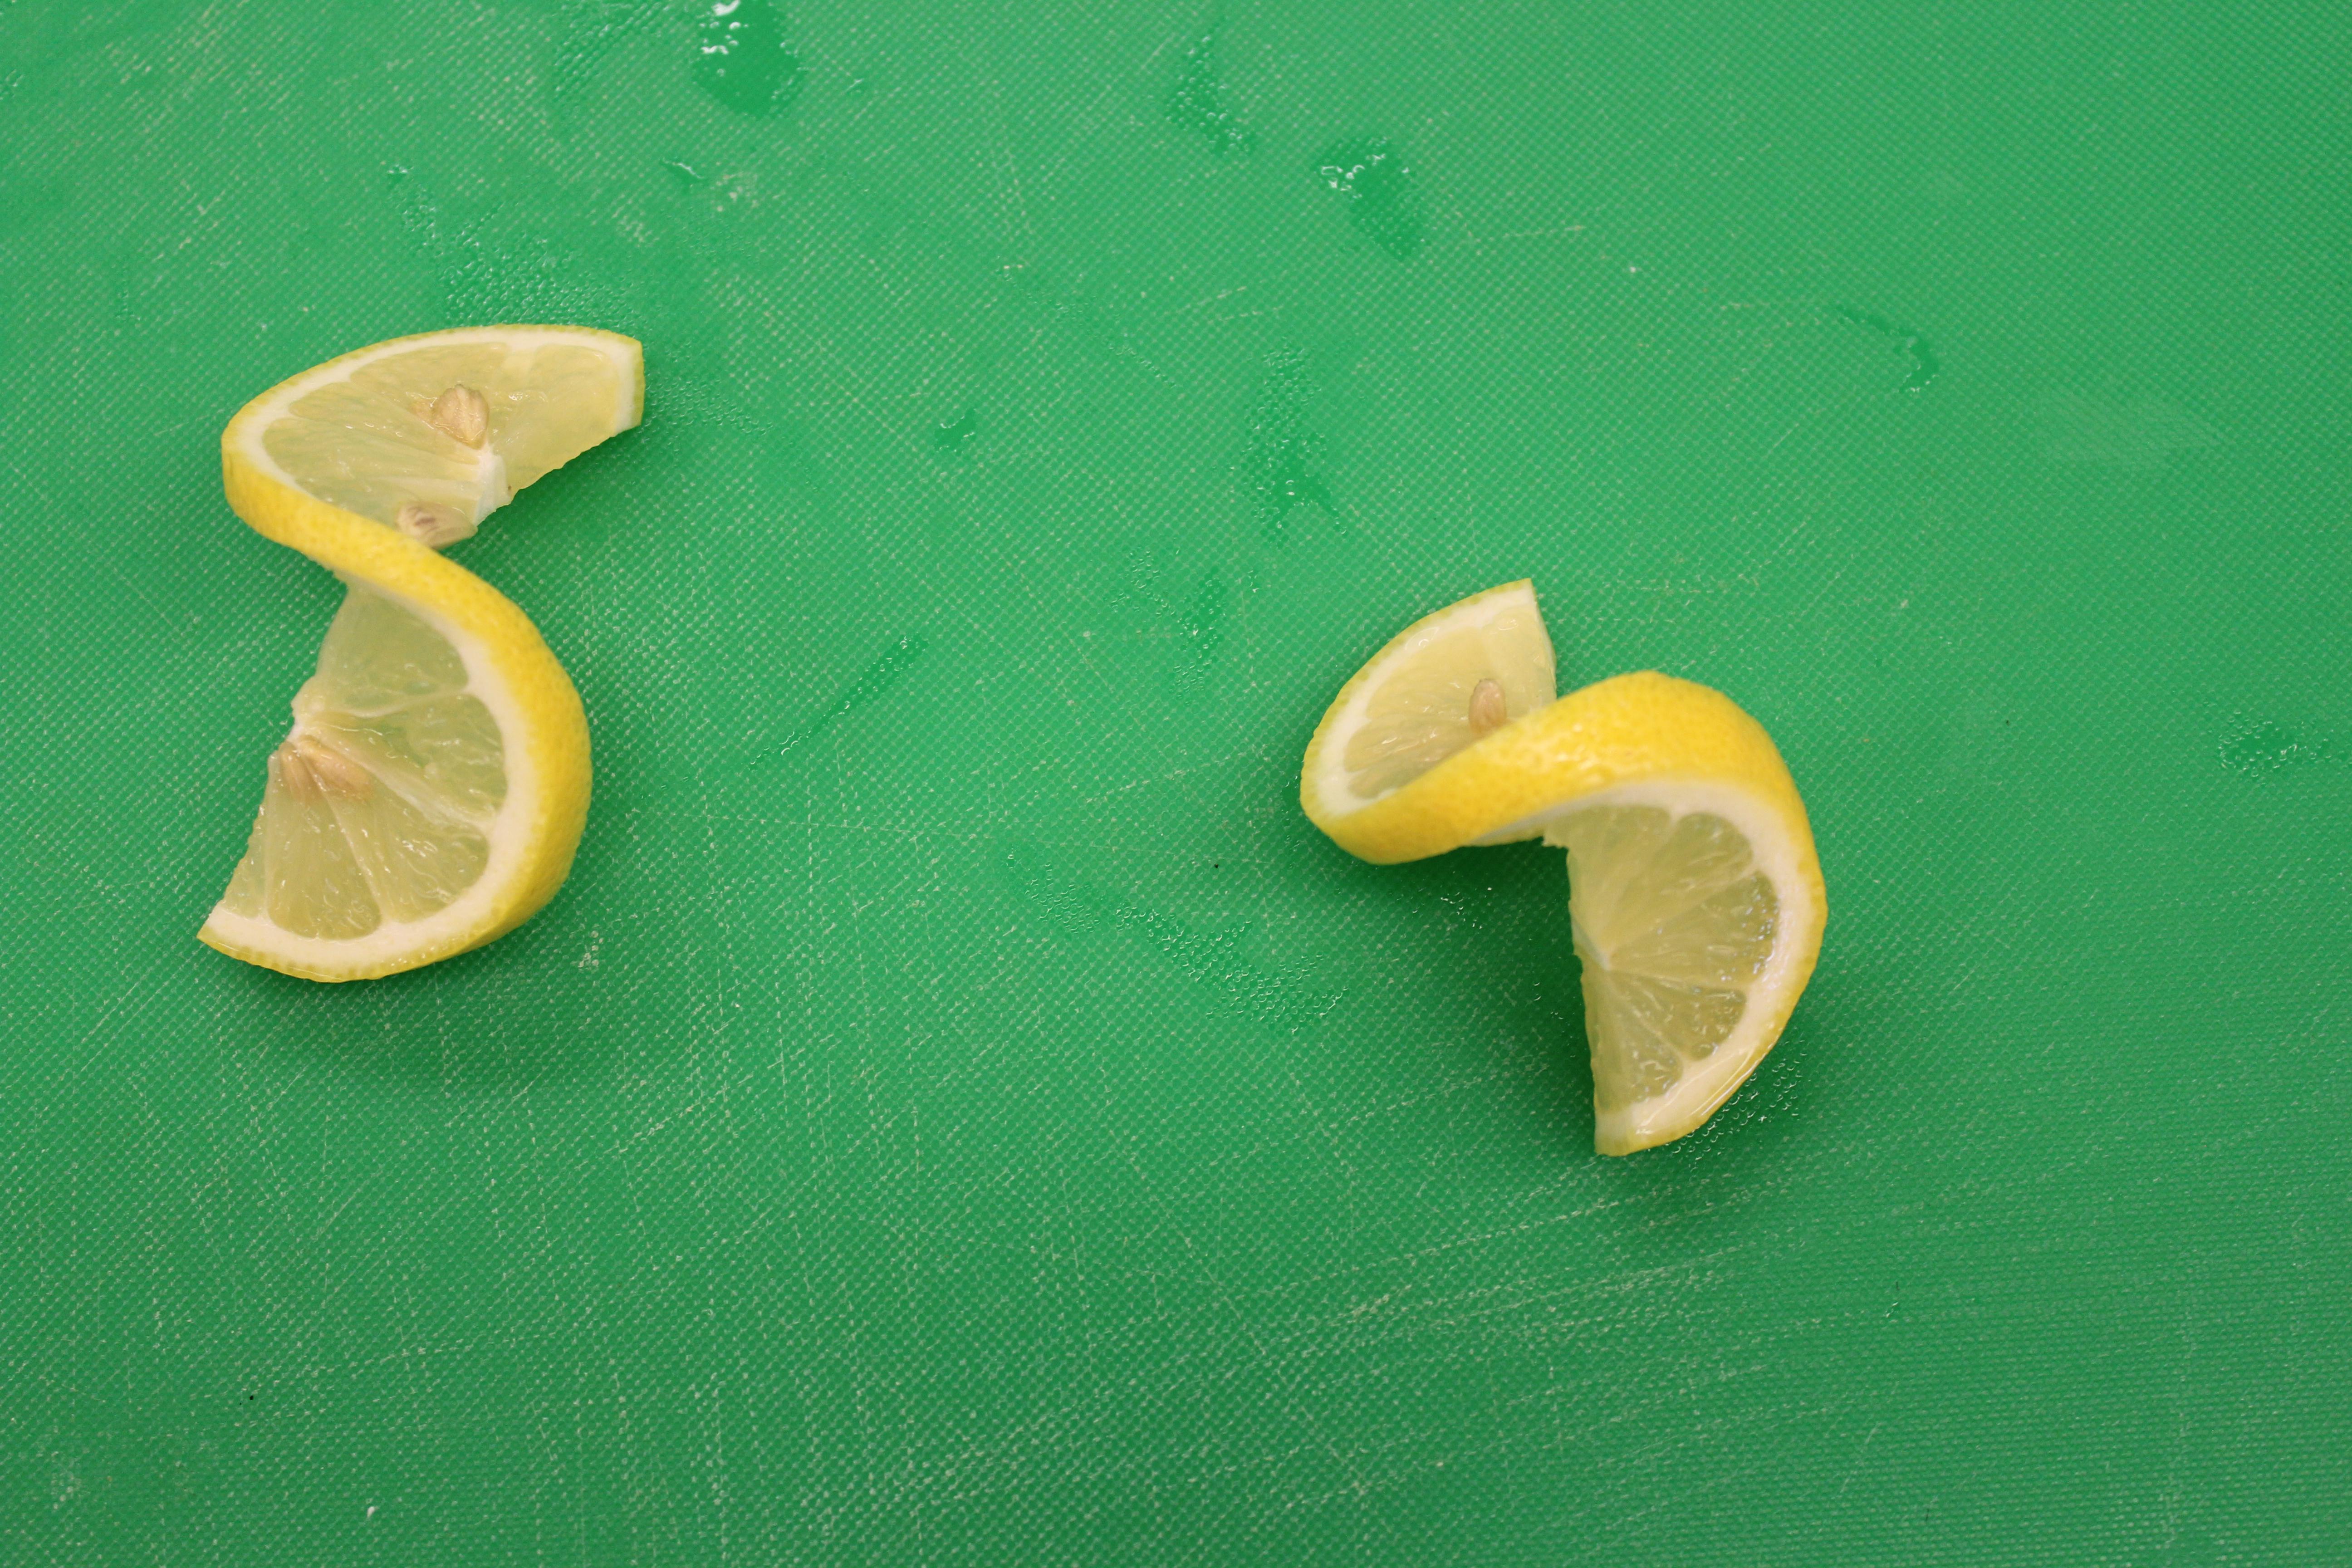 How to Make a Lemon or Lime Twist - Easy Way to Make Citrus Curls